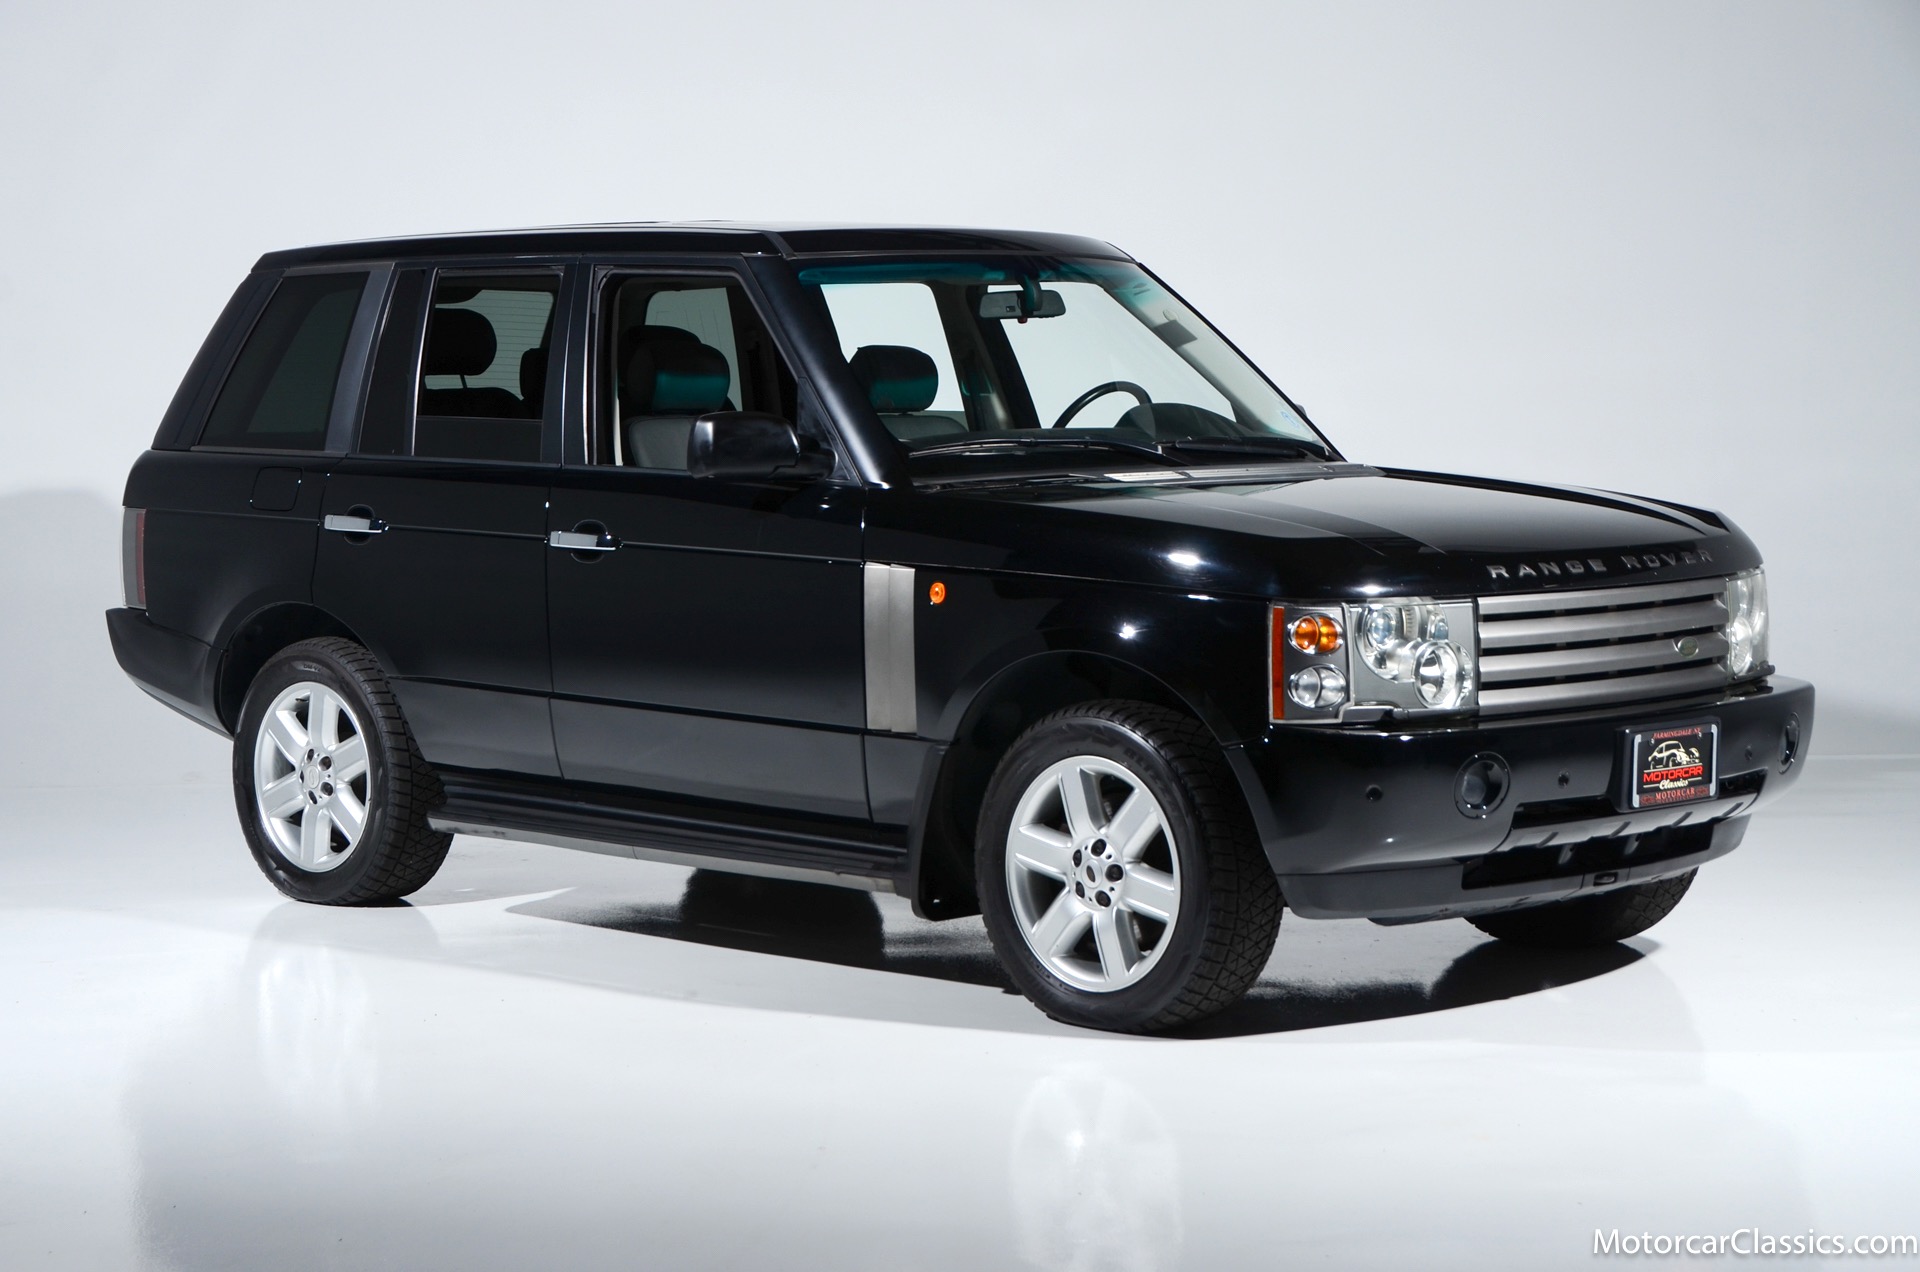 2003 Land Rover Range Rover For Sale | Vintage Driving Machines